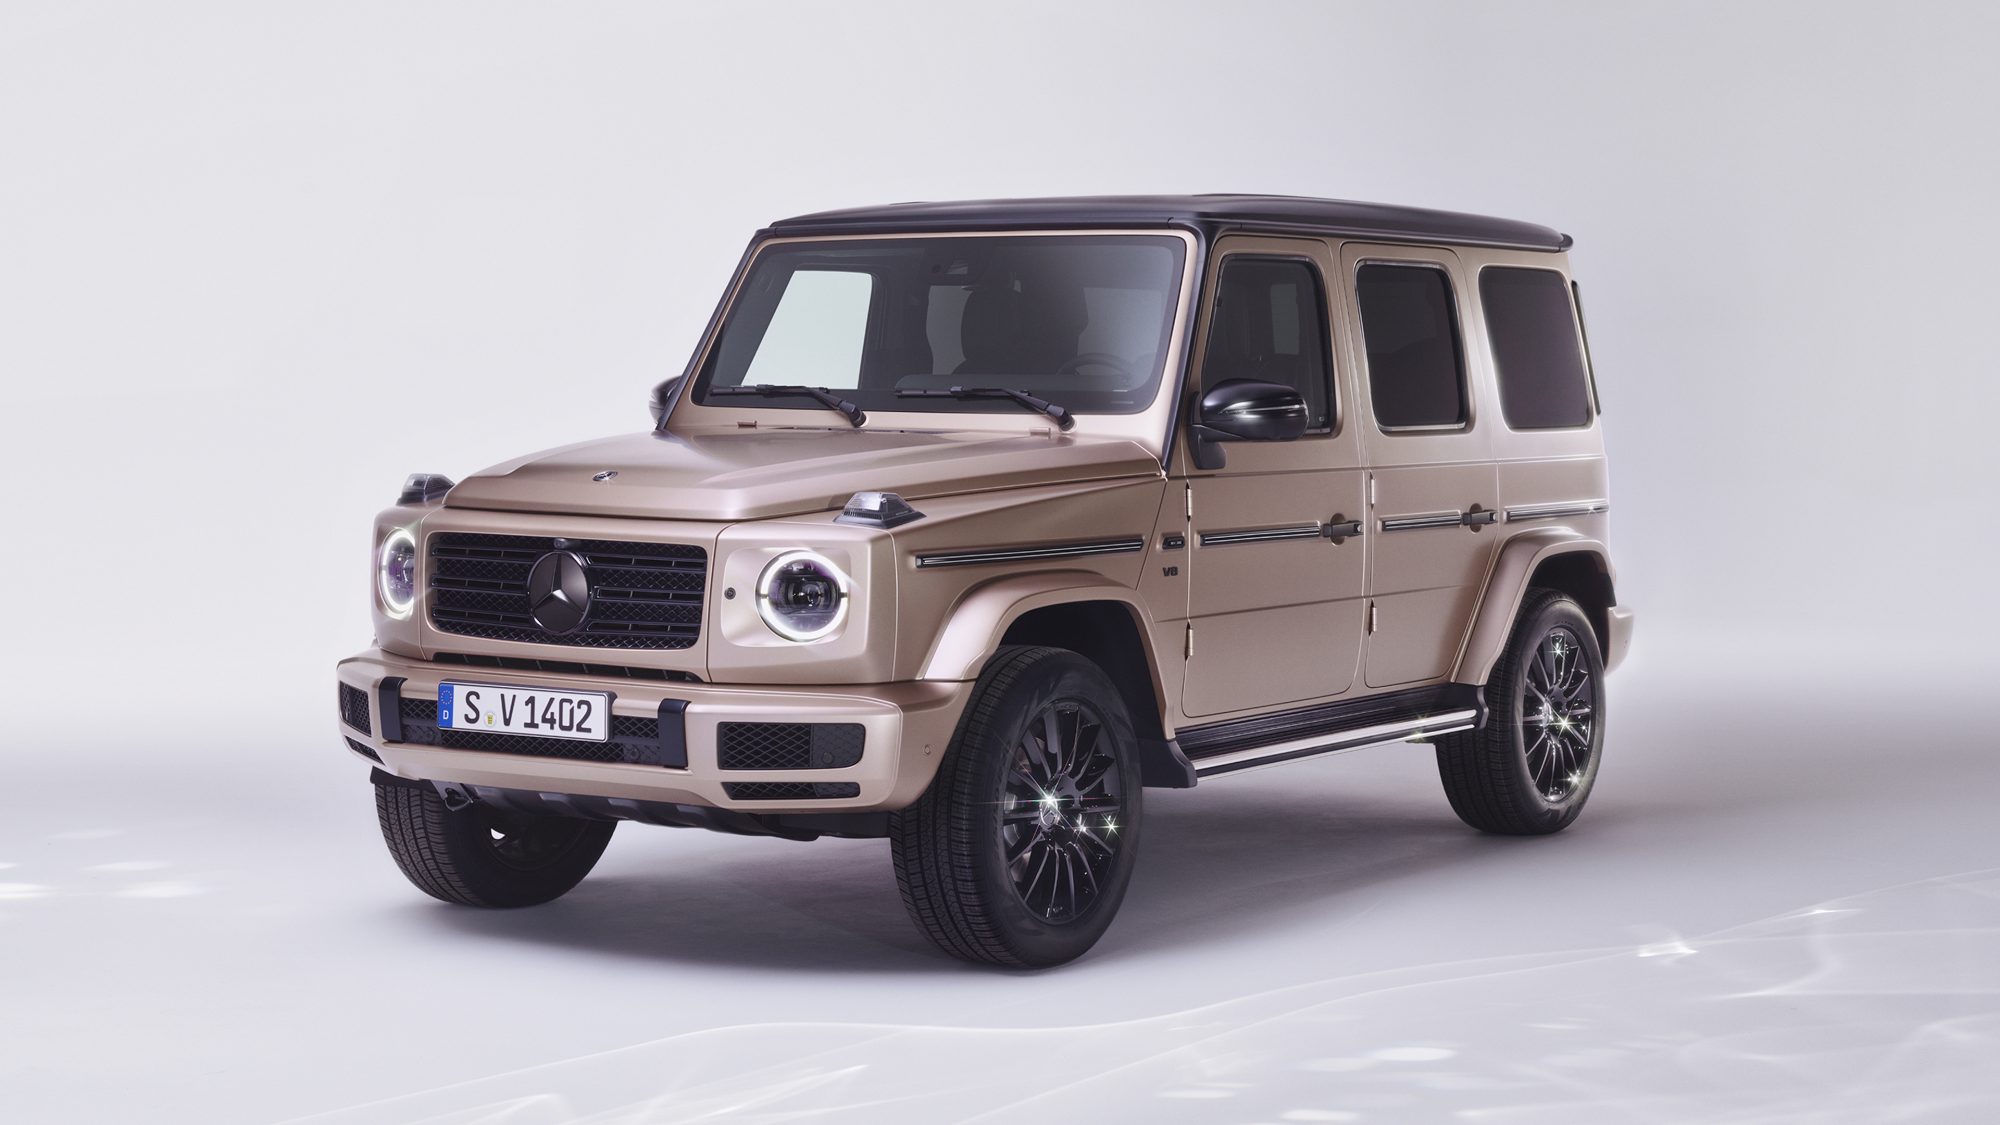 The Mercedes-Benz G-Class Stronger Than Diamonds Edition is the ultimate love affair